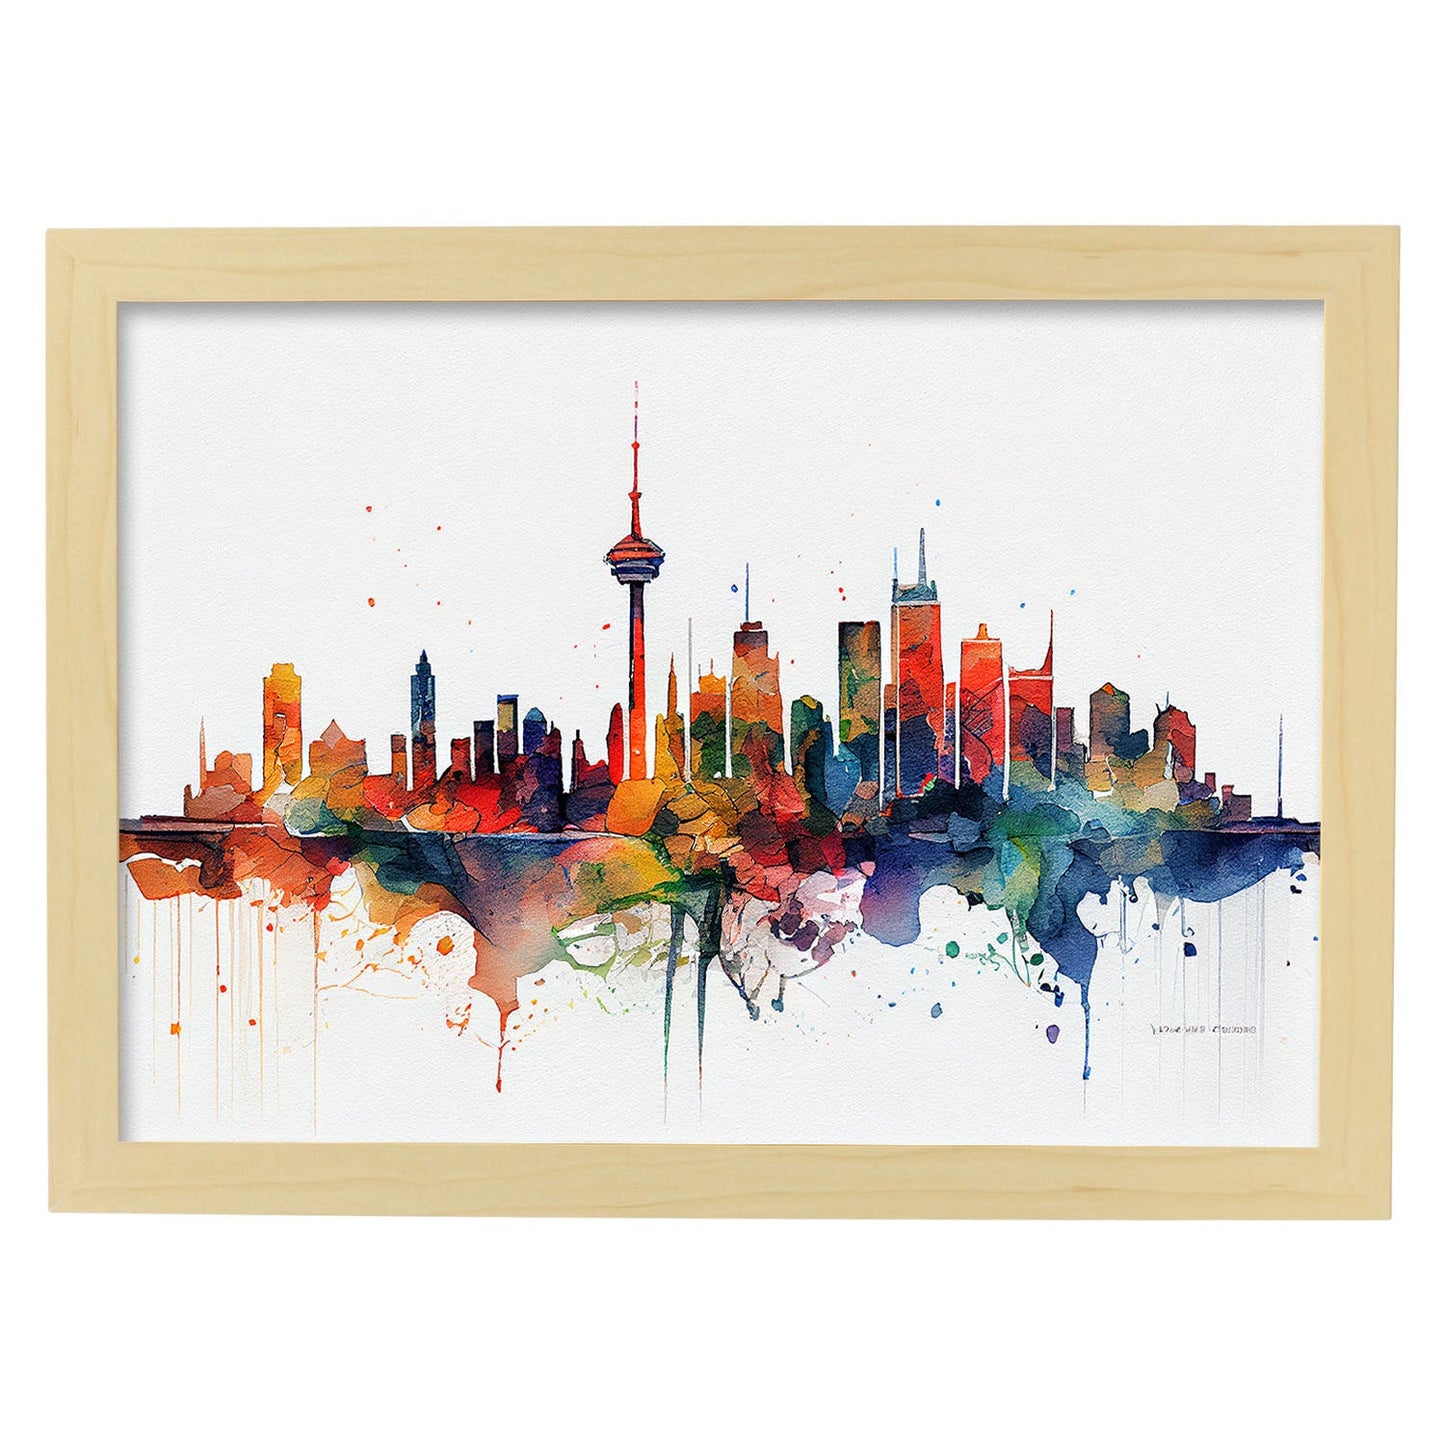 Nacnic watercolor of a skyline of the city of Toronto_2. Aesthetic Wall Art Prints for Bedroom or Living Room Design.-Artwork-Nacnic-A4-Marco Madera Clara-Nacnic Estudio SL